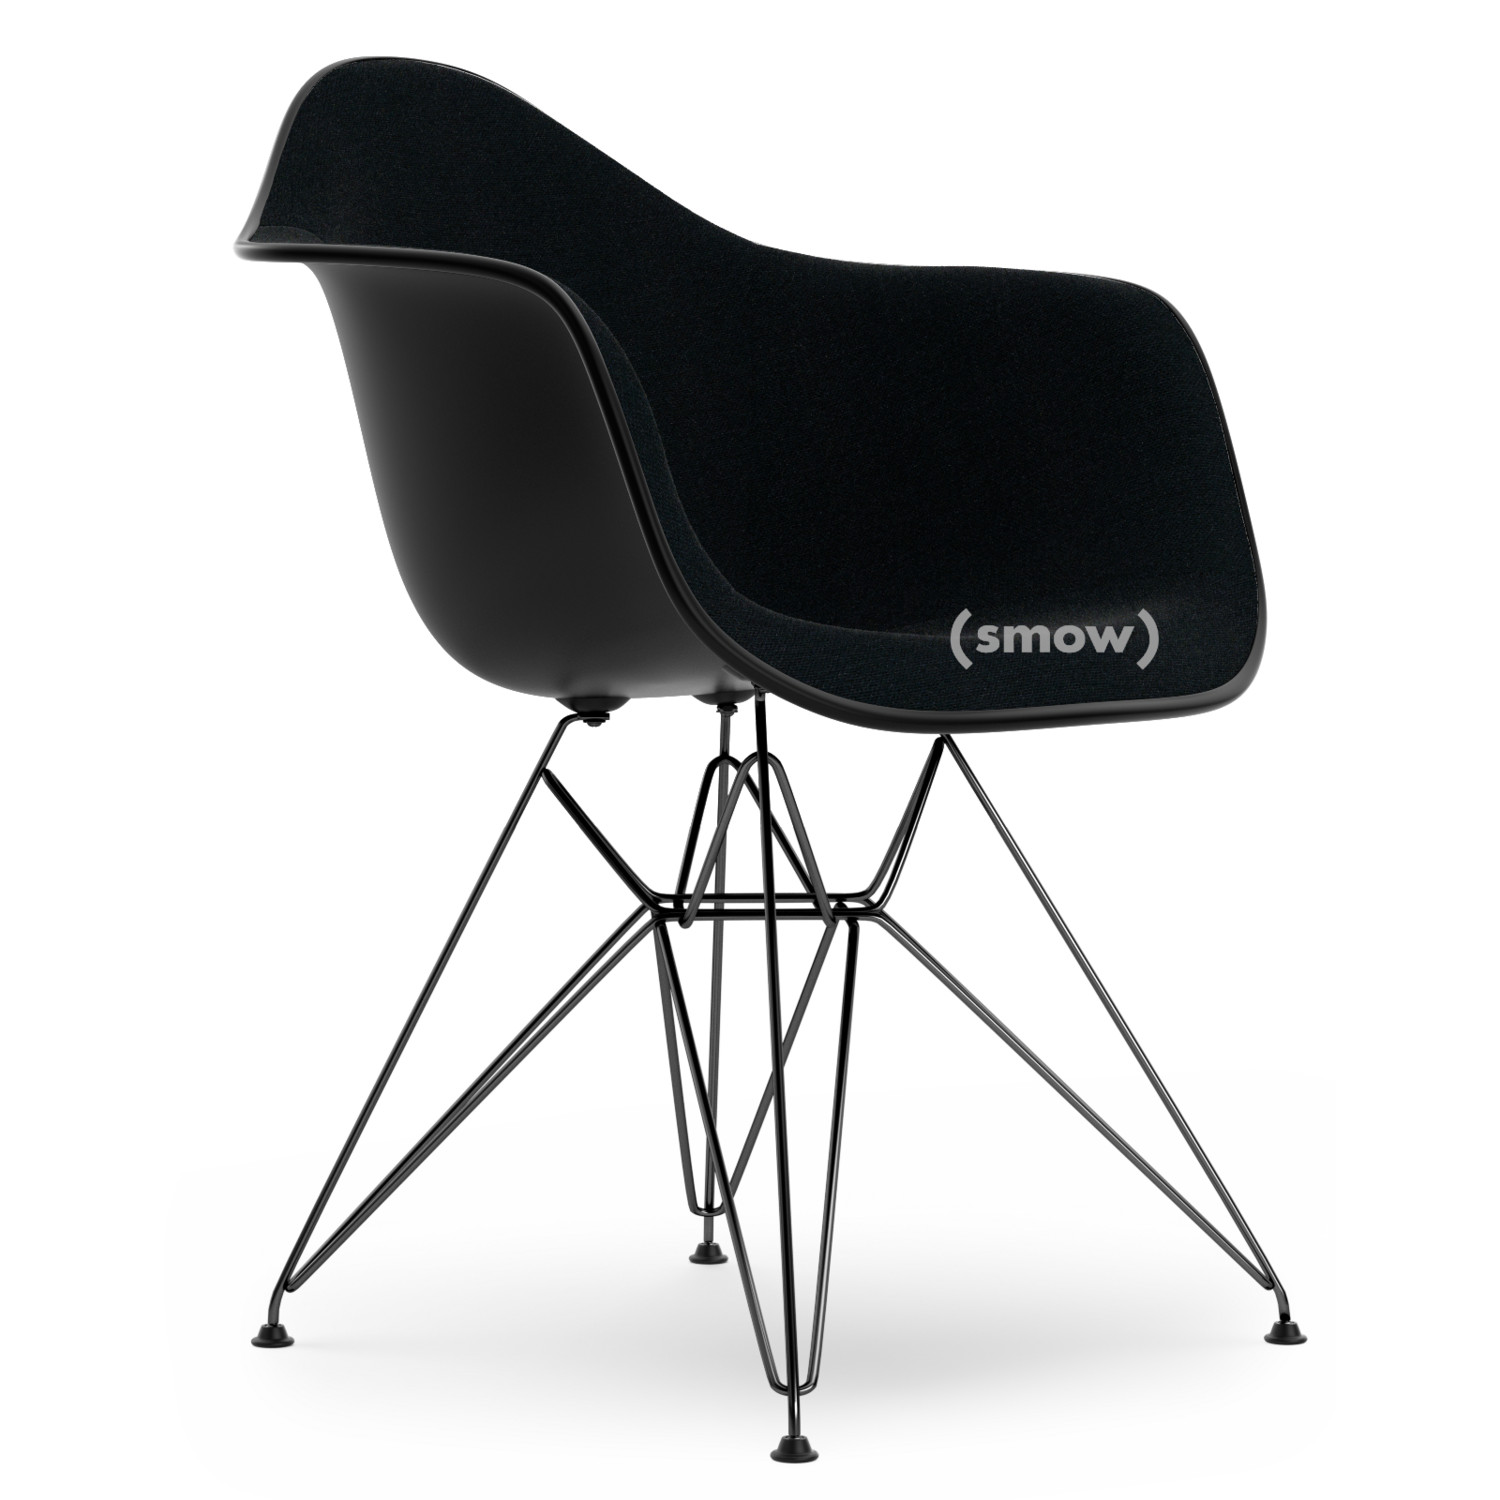 afvoer Vernederen Bandiet Vitra Eames Plastic Armchair DAR, Deep black, With full upholstery, Nero,  Standard version - 43 cm, Coated basic dark by Charles & Ray Eames, 1950 -  Designer furniture by smow.com